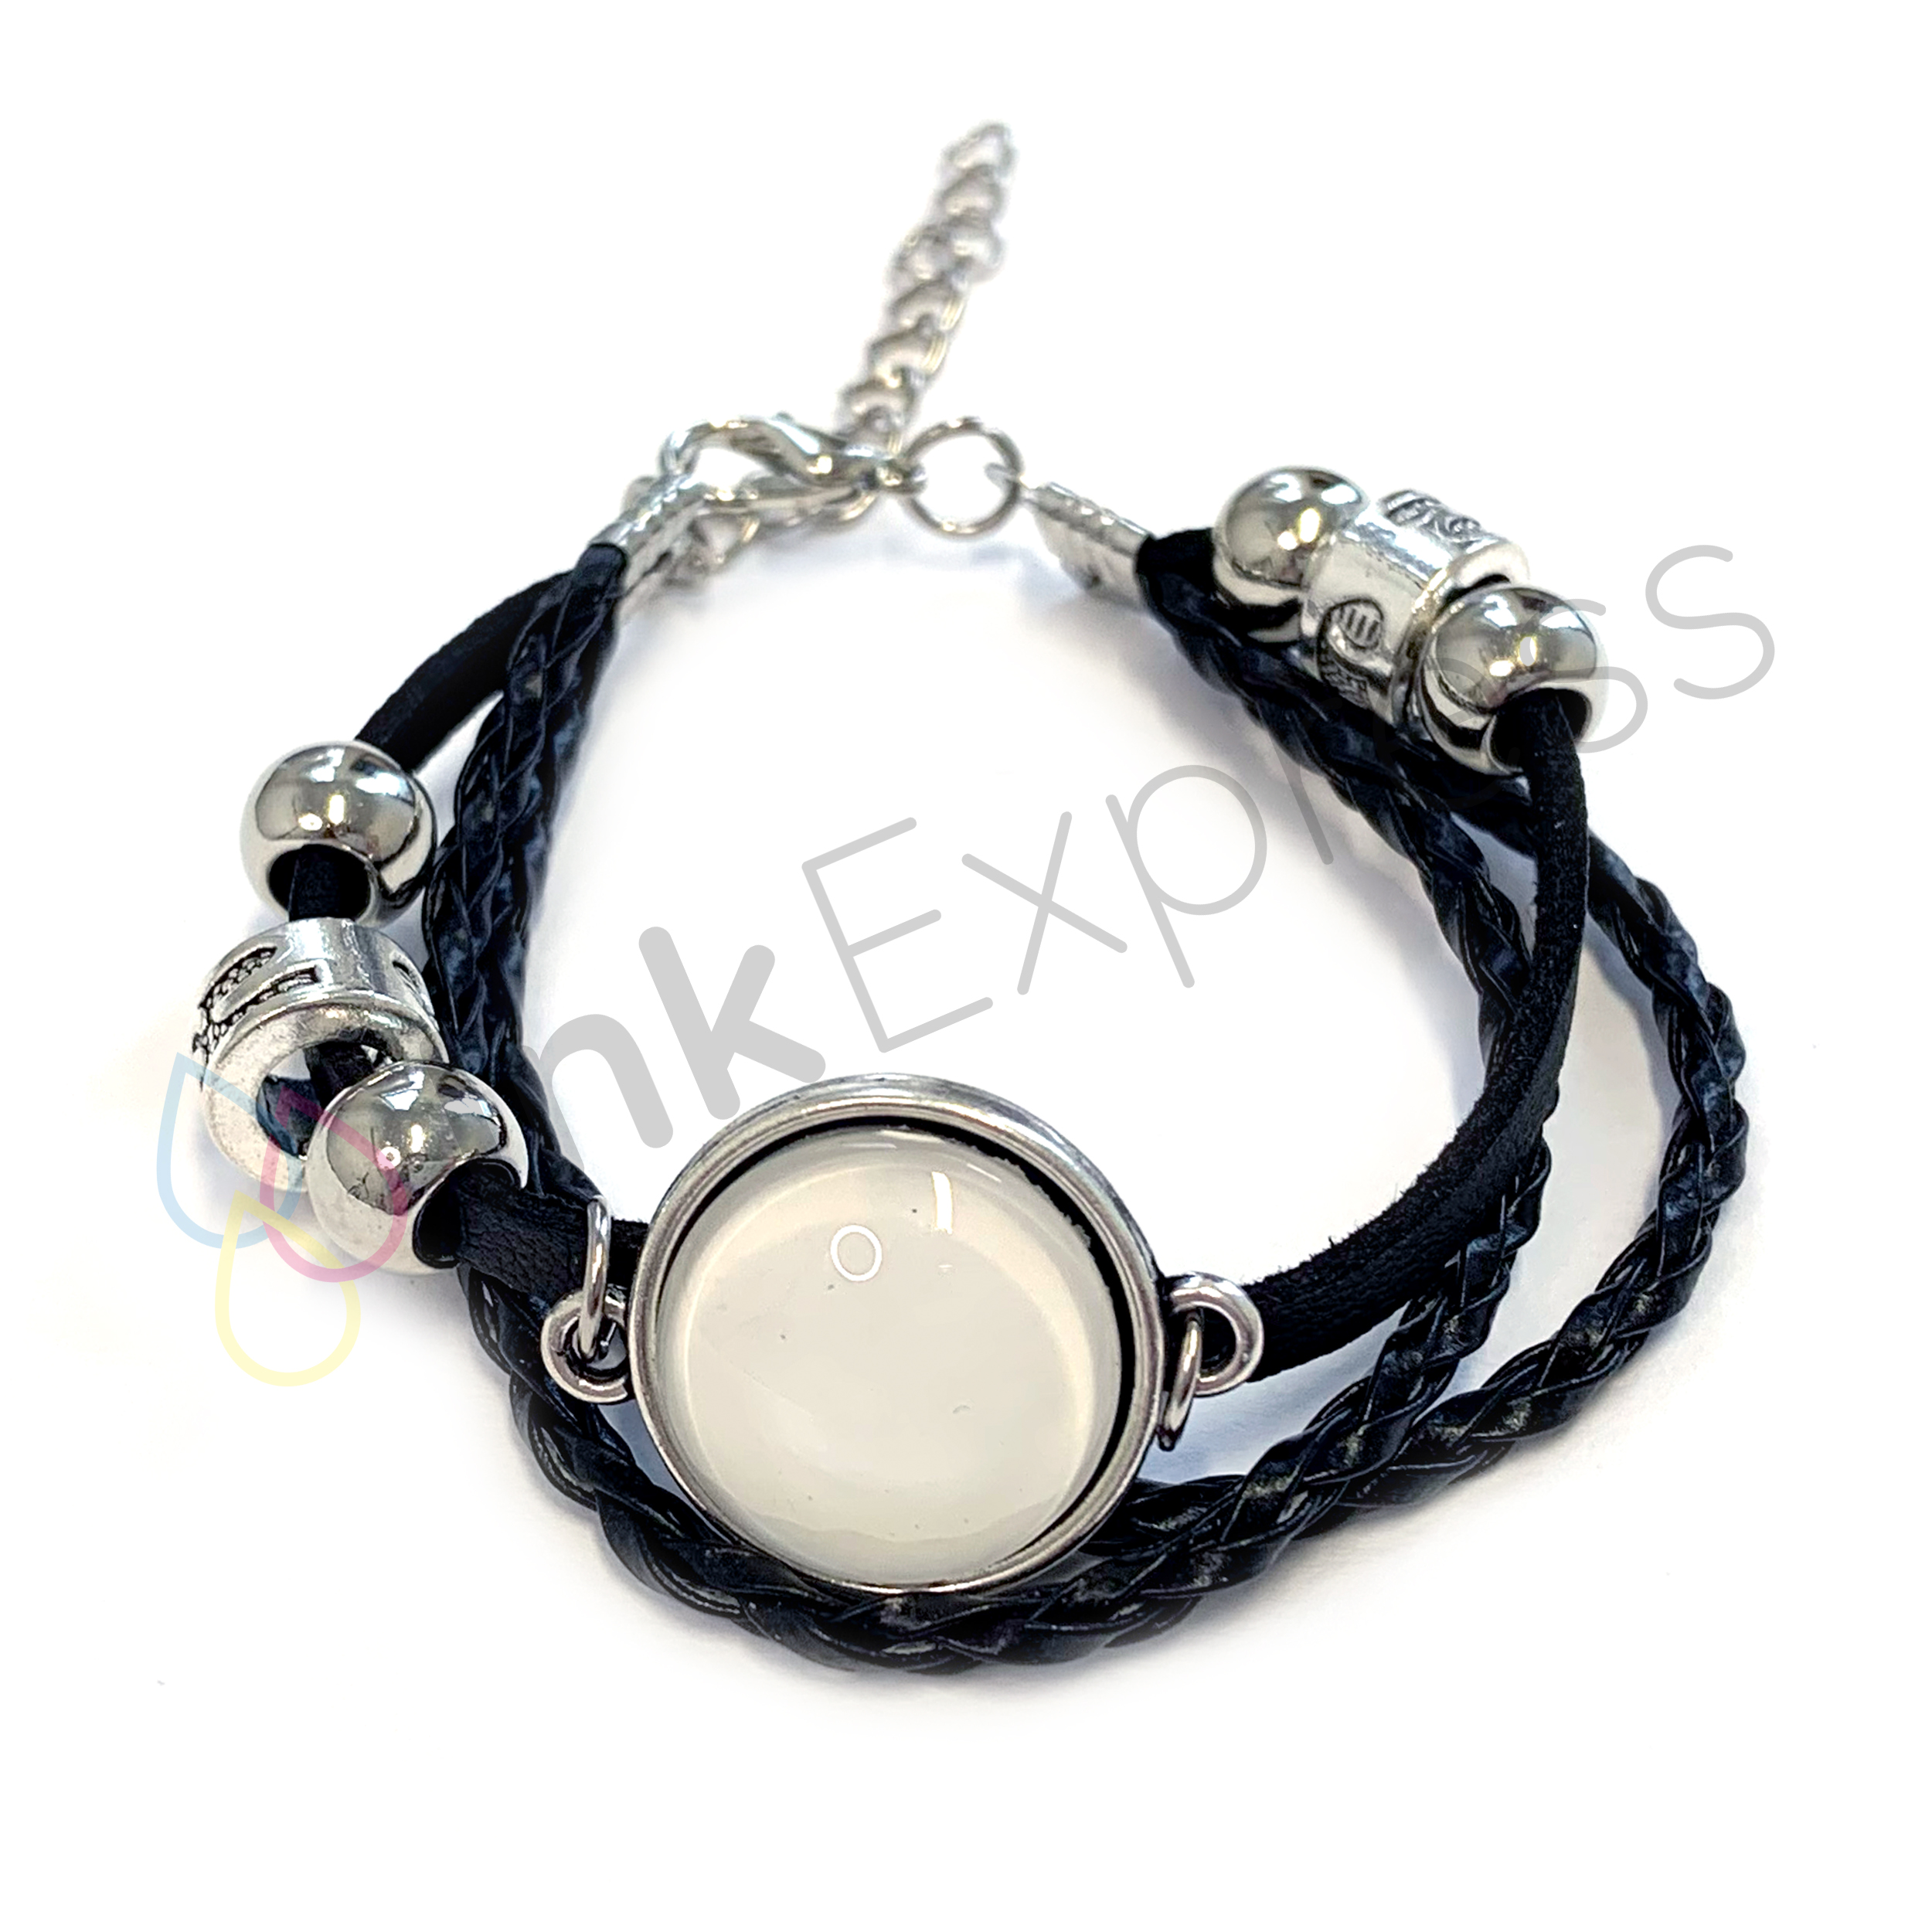 Sublimation Peach Heart Bracelet - Orcacoatings, the Best-Selling  Sublimation product brand